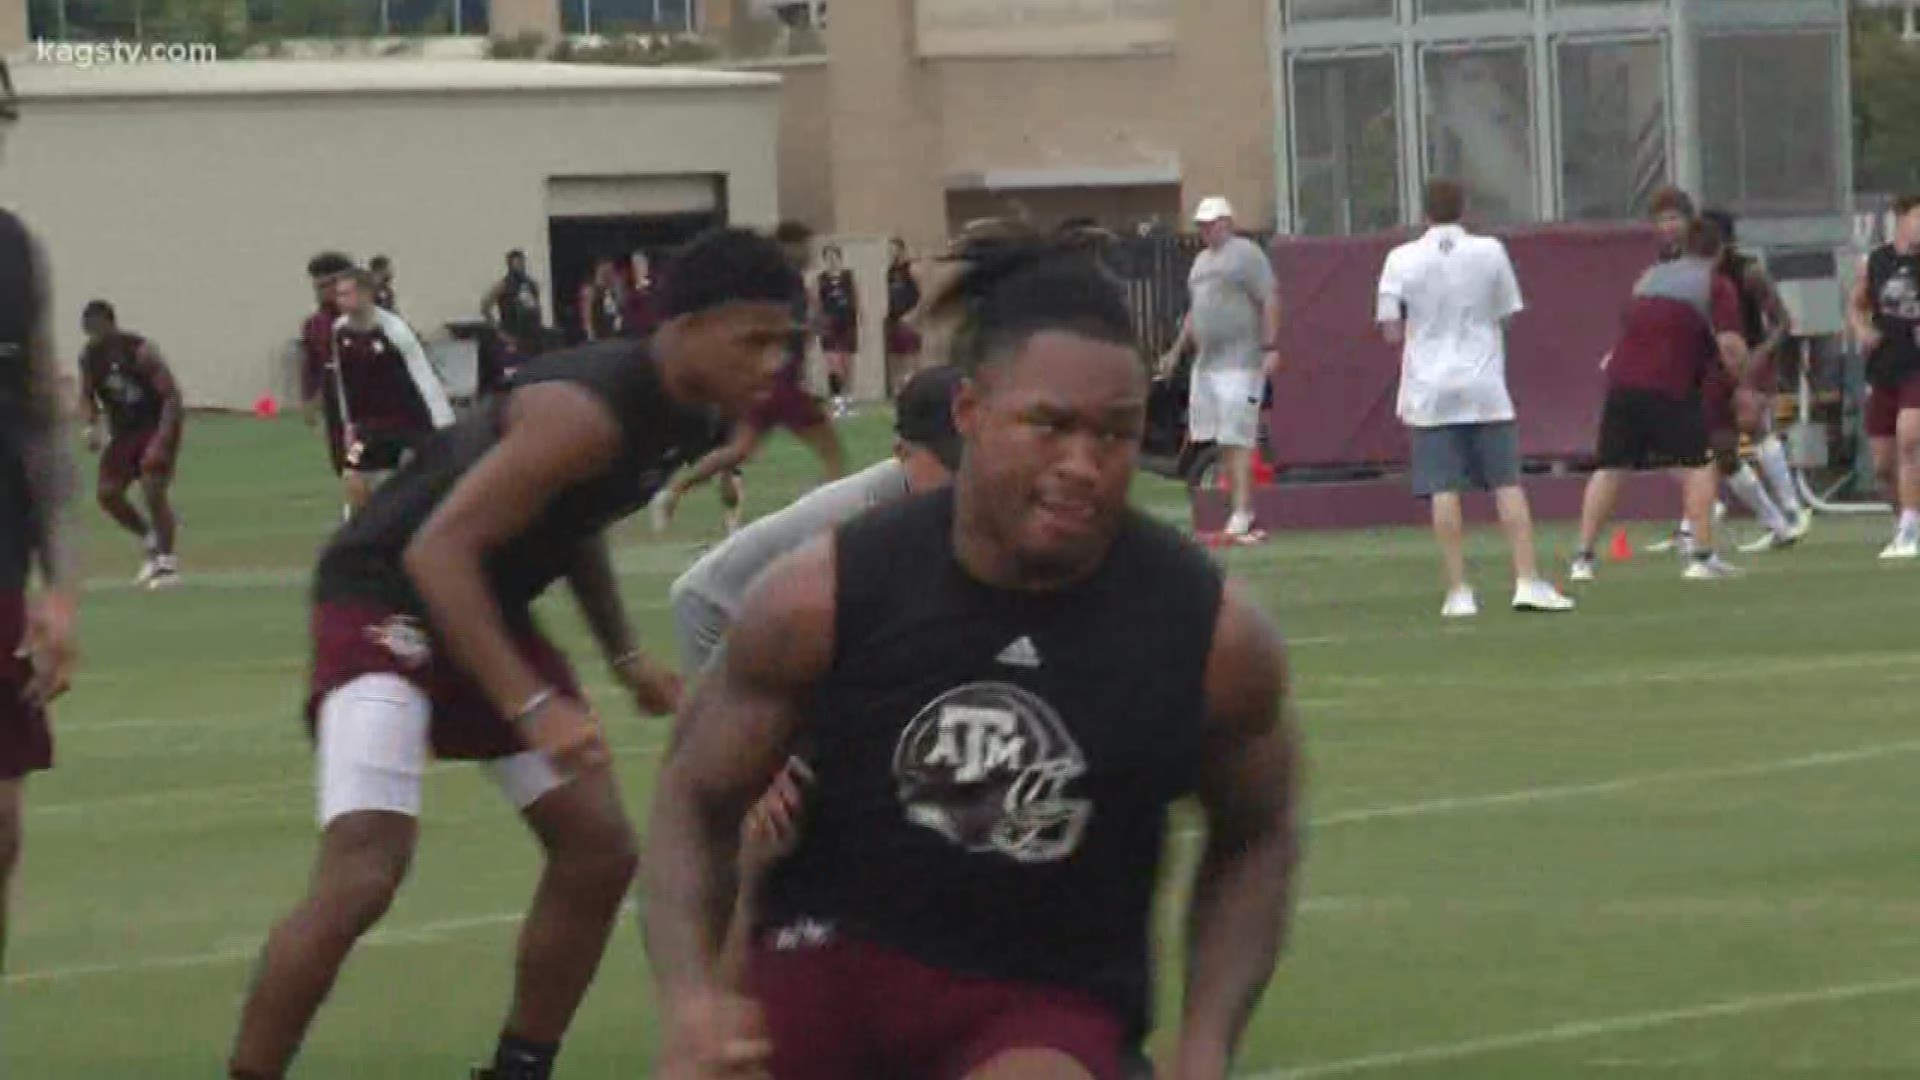 Texas A&M held its first conditioning session of the 2020 season.